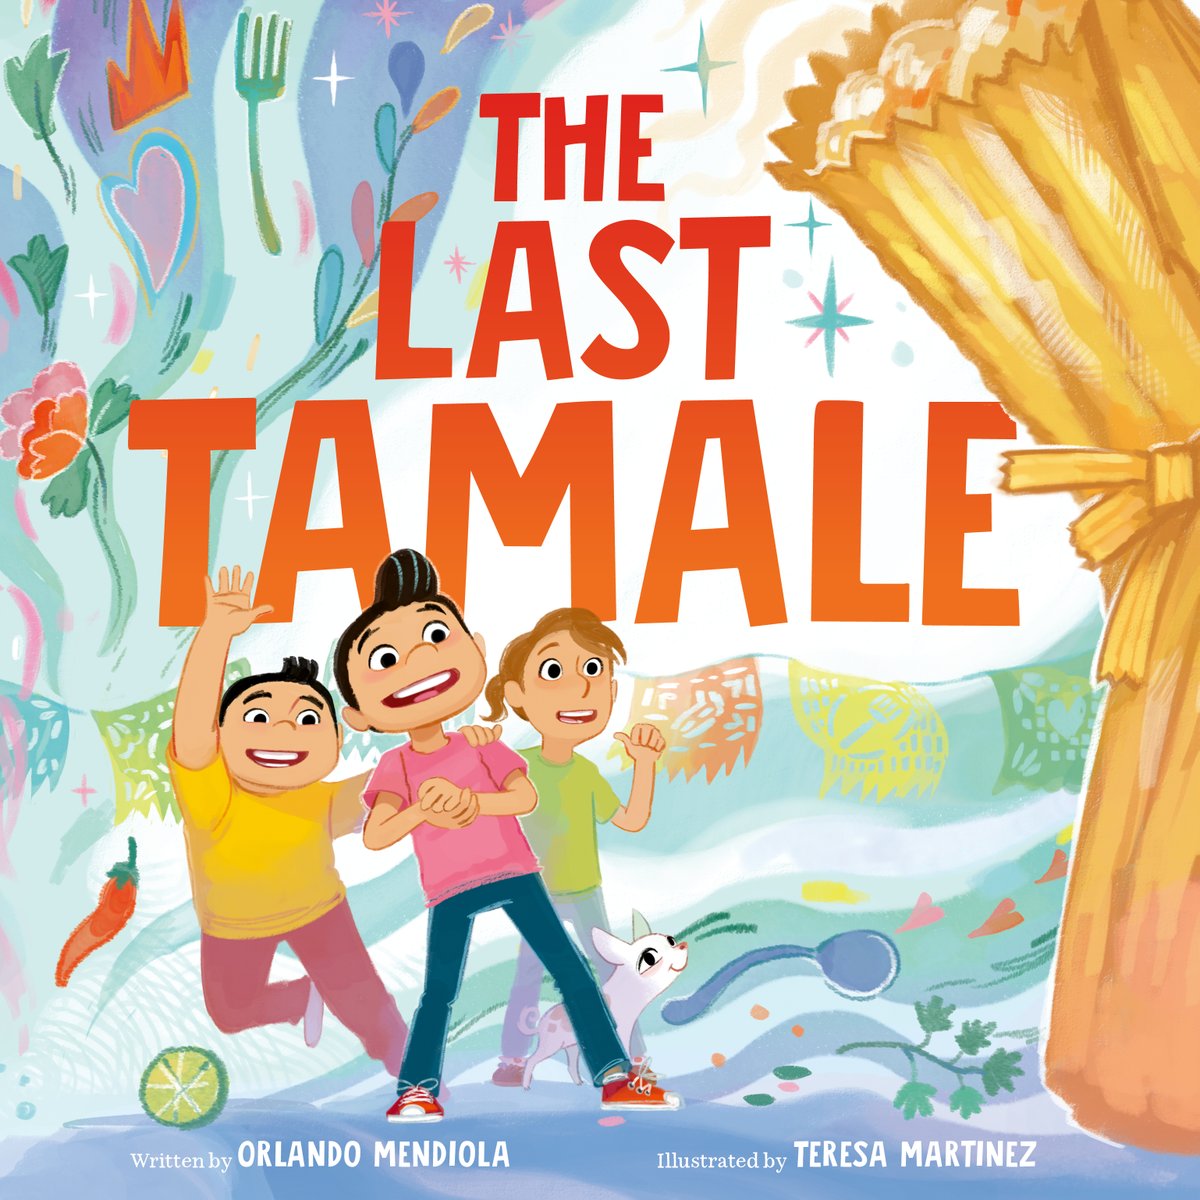 Congrats to former ⭐️ @NewSchoolWrites student @landomendiola on the beautiful cover of his debut @HarperCollins picture book THE LAST TAMALE pitched in my online book class & out 9/3 thanks to @ErDiPasquale @SWekstein @lisasharkey @teresamtz